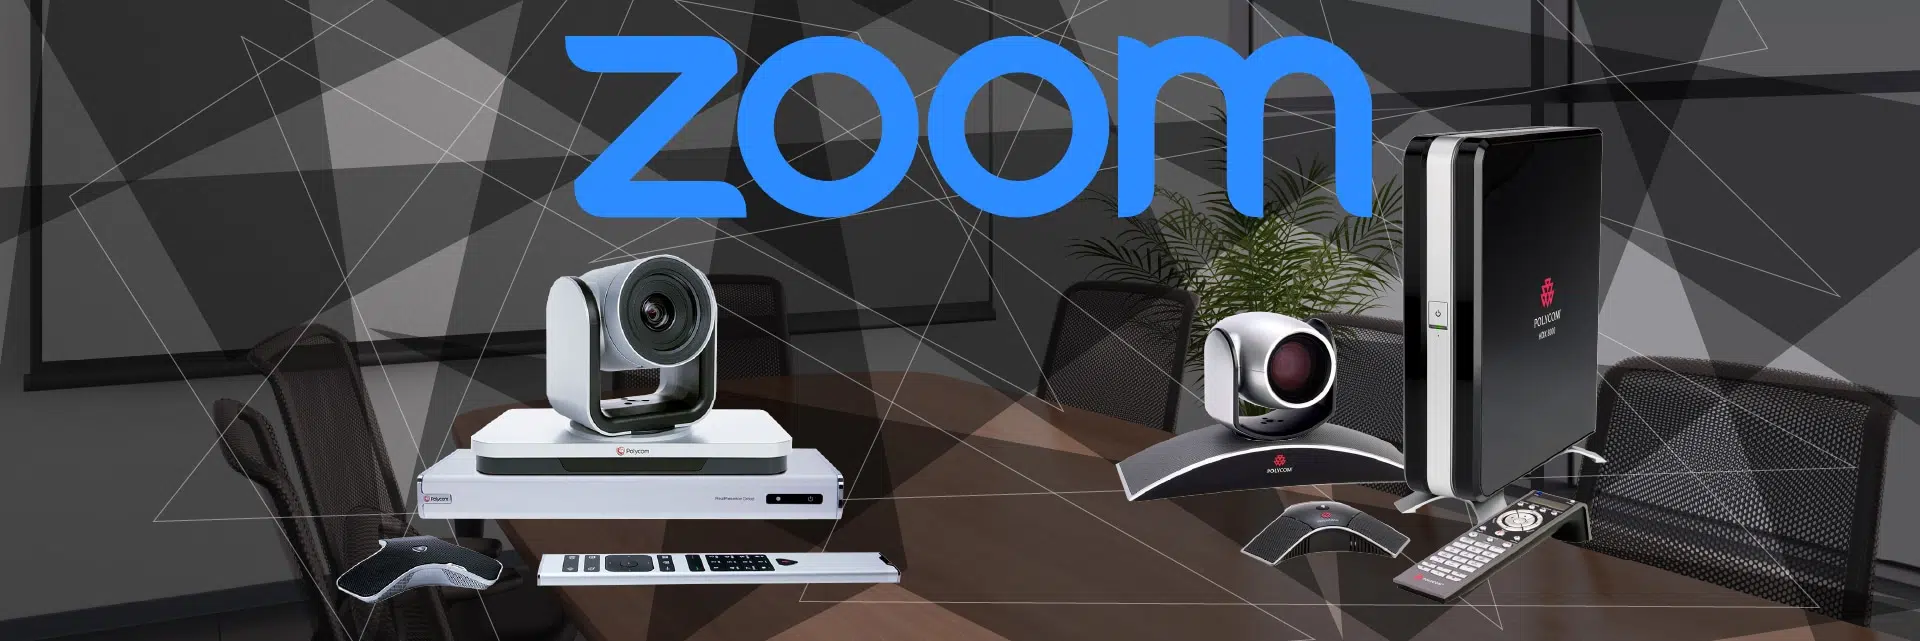 Zoom Room Connector – Connect Your H.323 or SIP Endpoints to Zoom